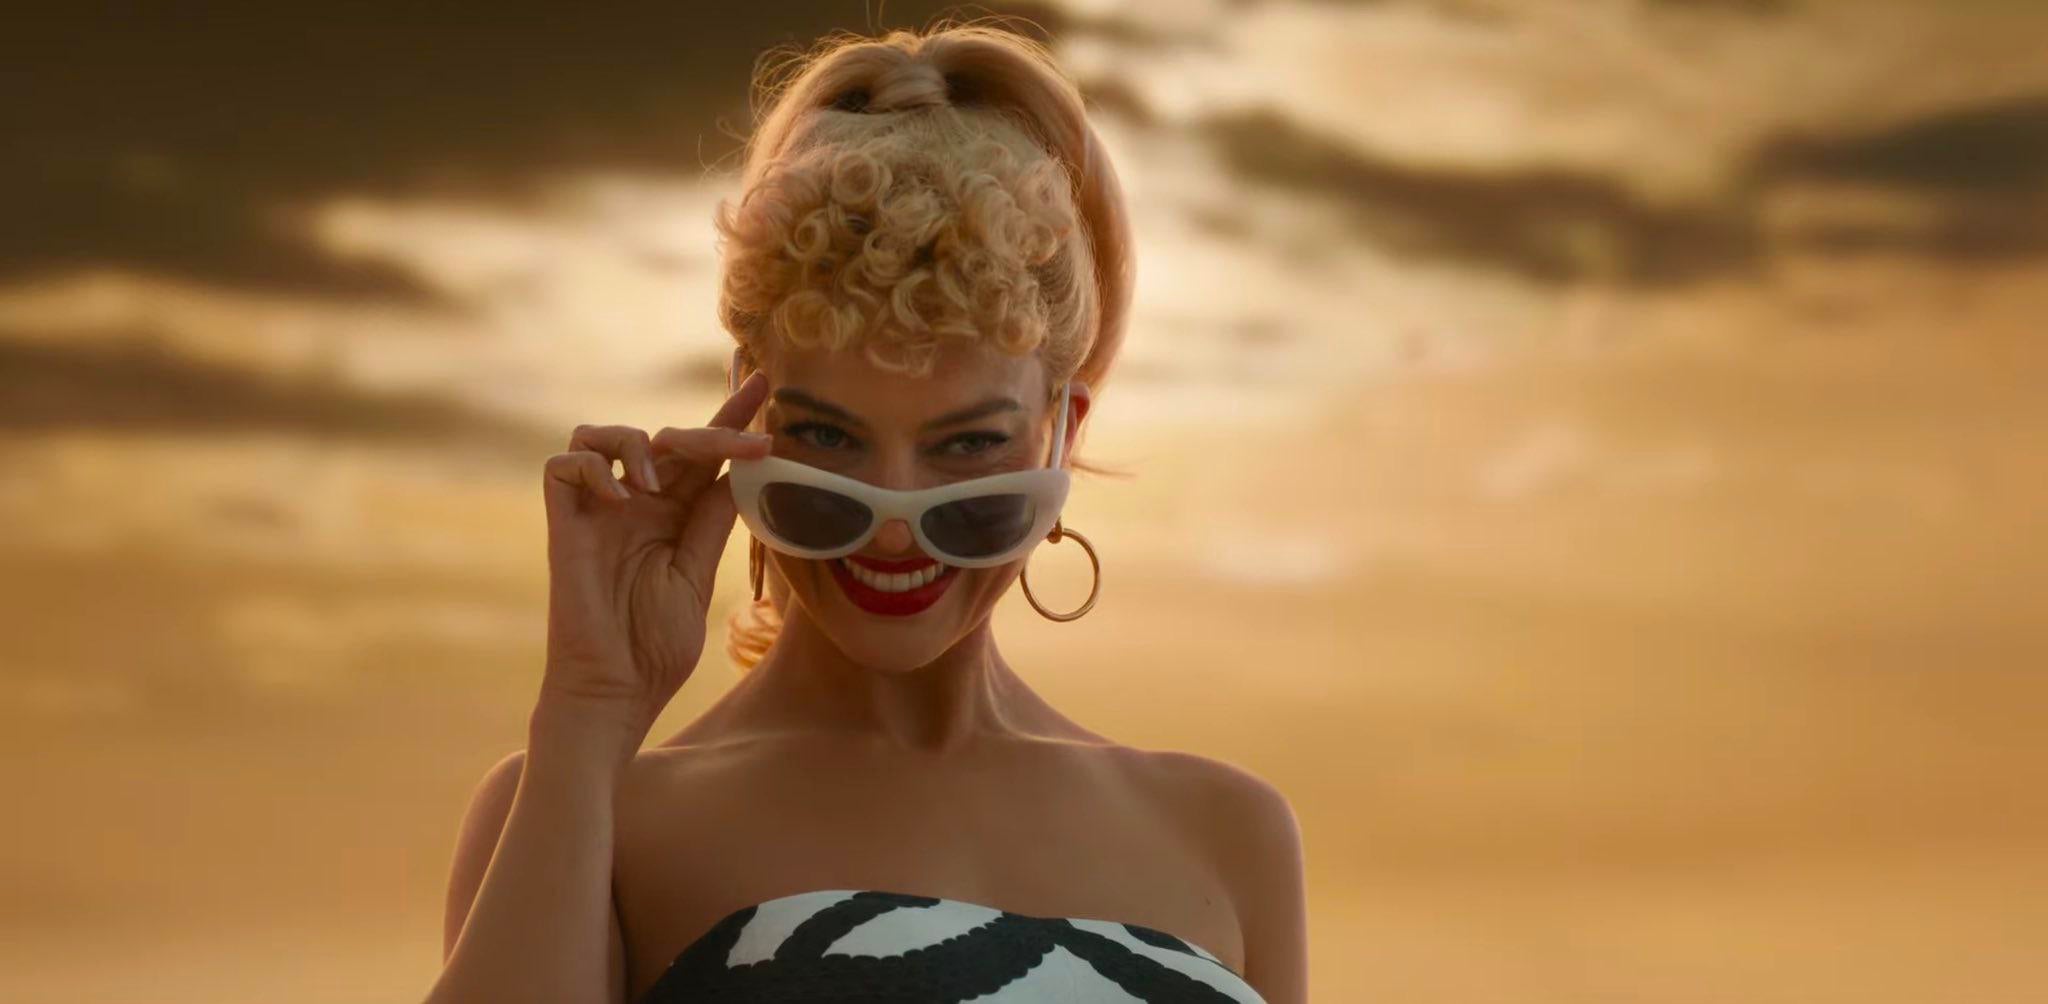 Photos n°11 : A New Look At Margot Robbie as Barbie in New Teaser!